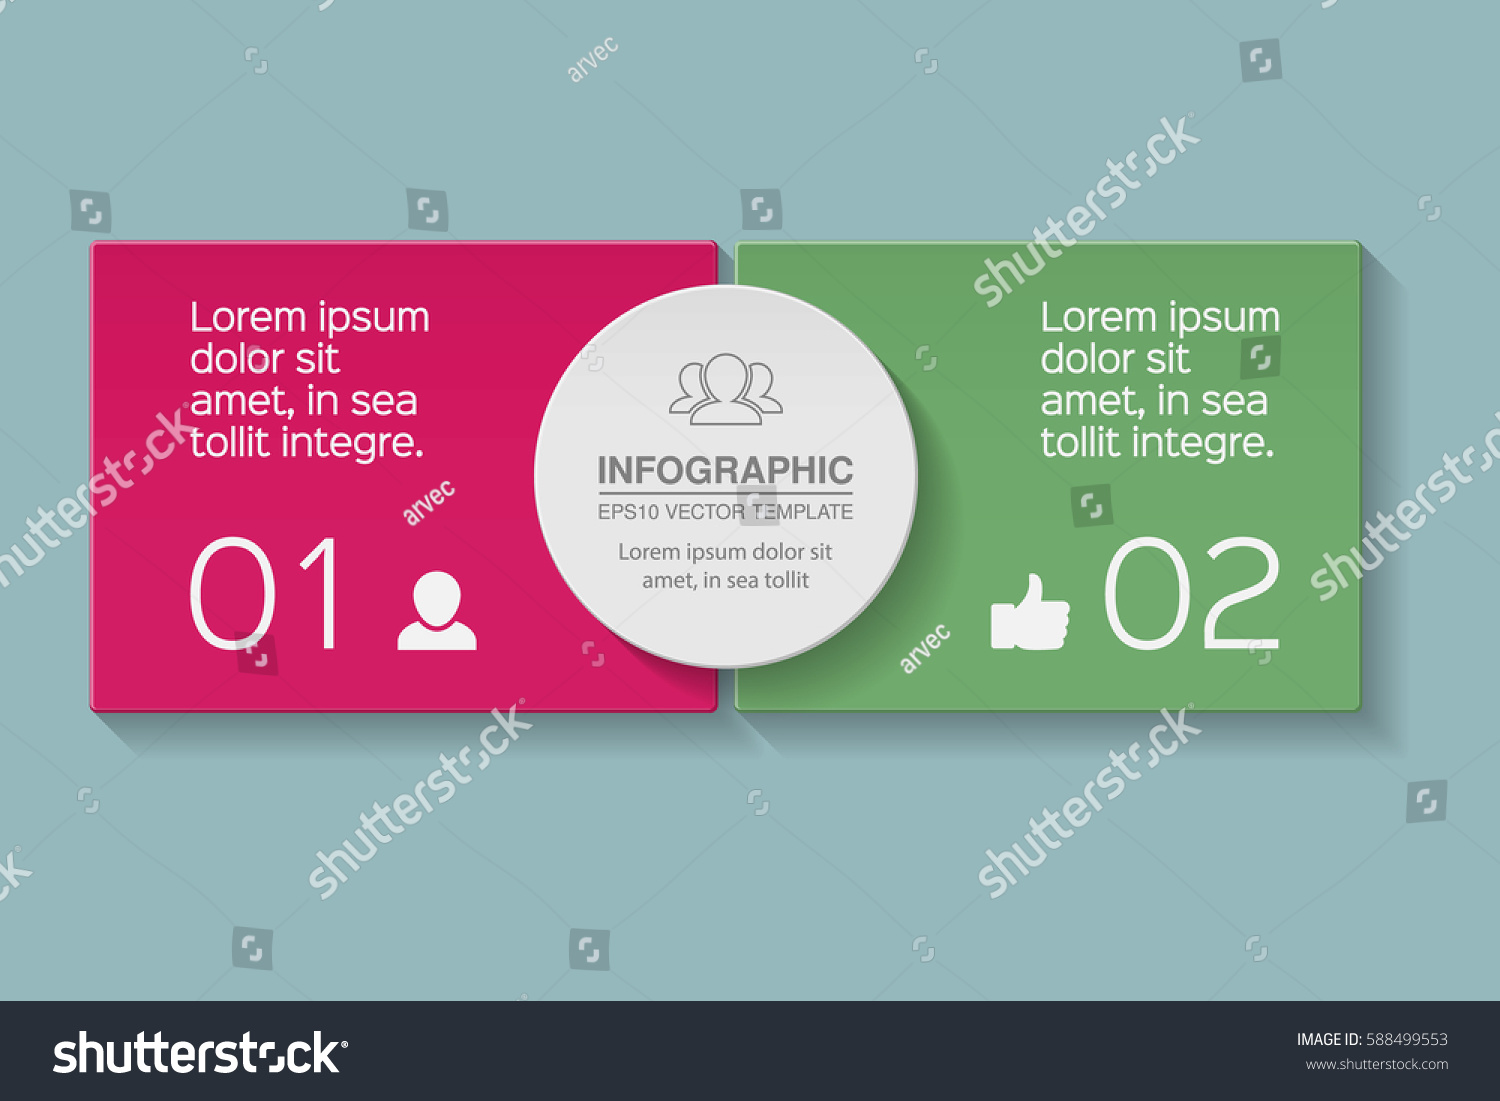 Vector Infographic Template Two Options Royalty Free Stock Vector 588499553 2842